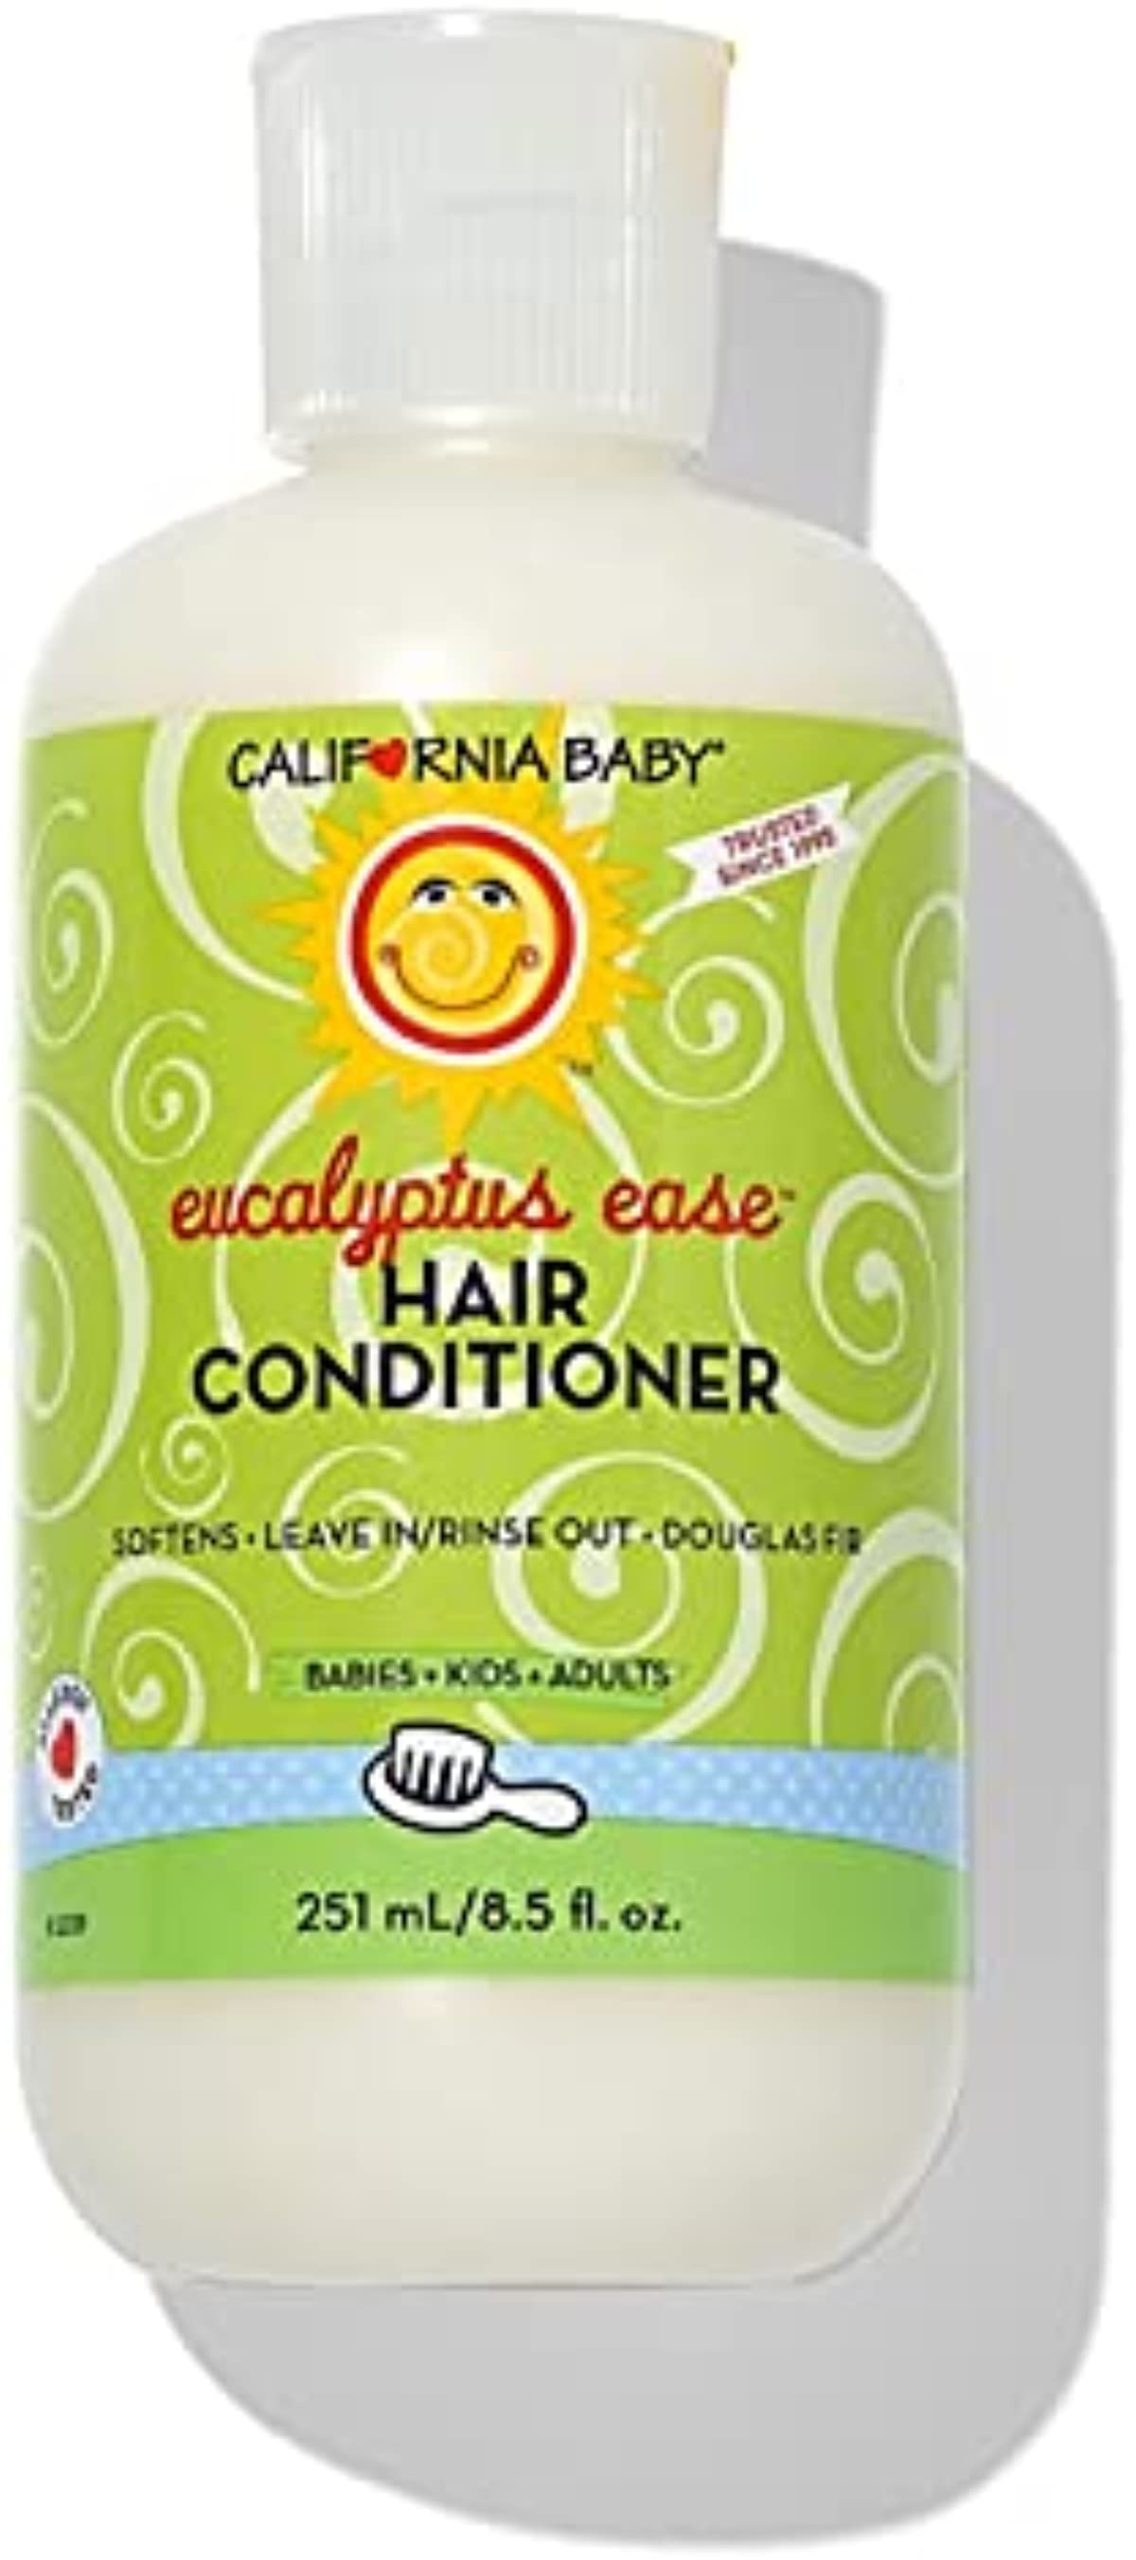 California Baby Eucalyptus Ease Hair Conditioner - Deep Conditioning & Soft Detangling Hair Care for Babies, Kids & Toddlers, Leave In & Rinse Out, 8.5oz